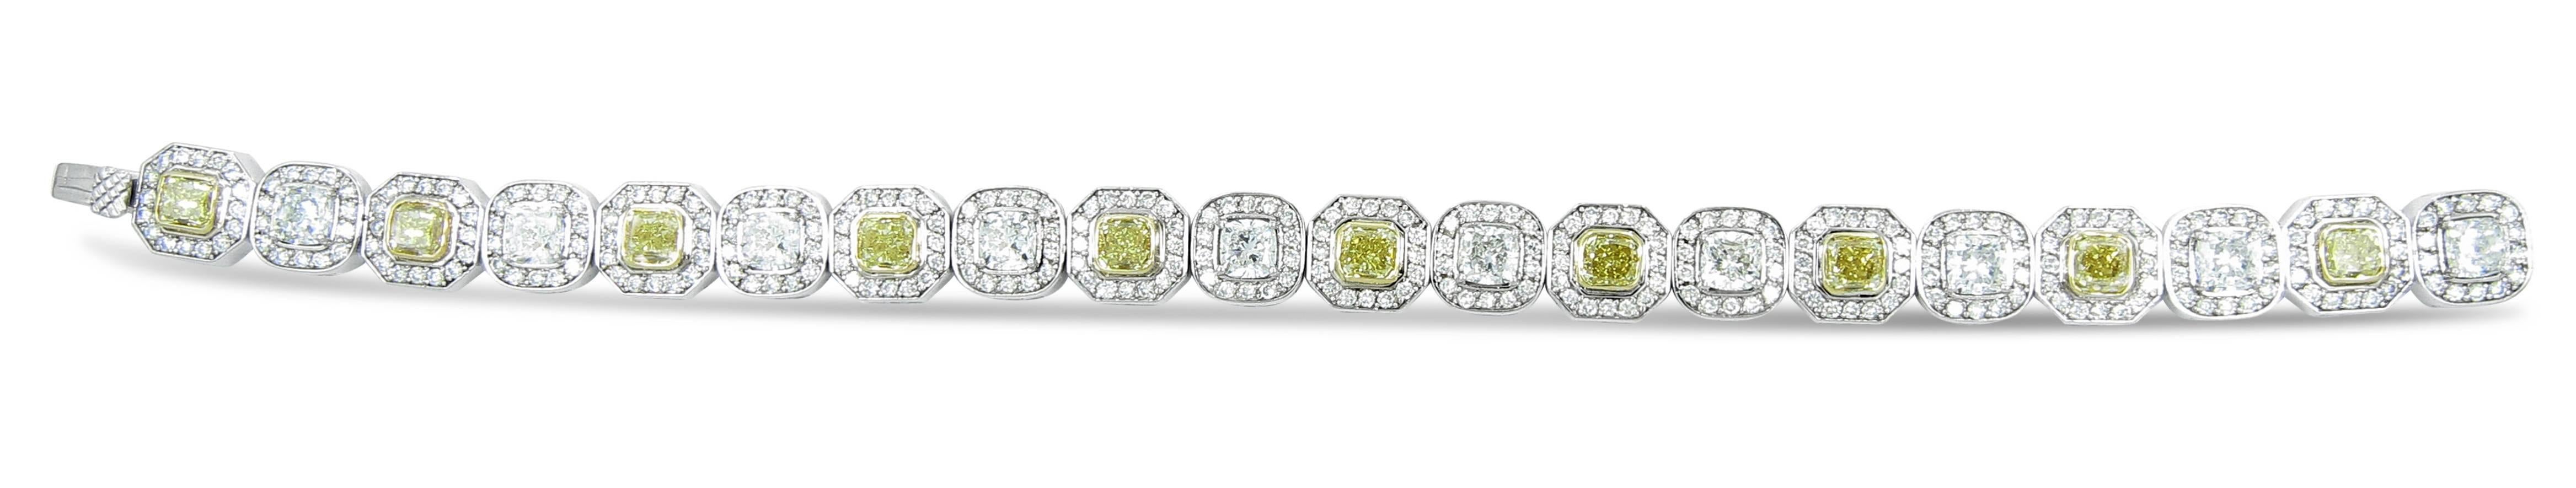 Beautiful bracelet is in 18k white gold with halo style alternating fancy yellow and white cushion cut diamonds with pave set round diamonds around each cushion cut diamond.
Fancy Yellow Cushion Cut Diamonds are SI1 in Clarity - 5.58ctw
Cushion